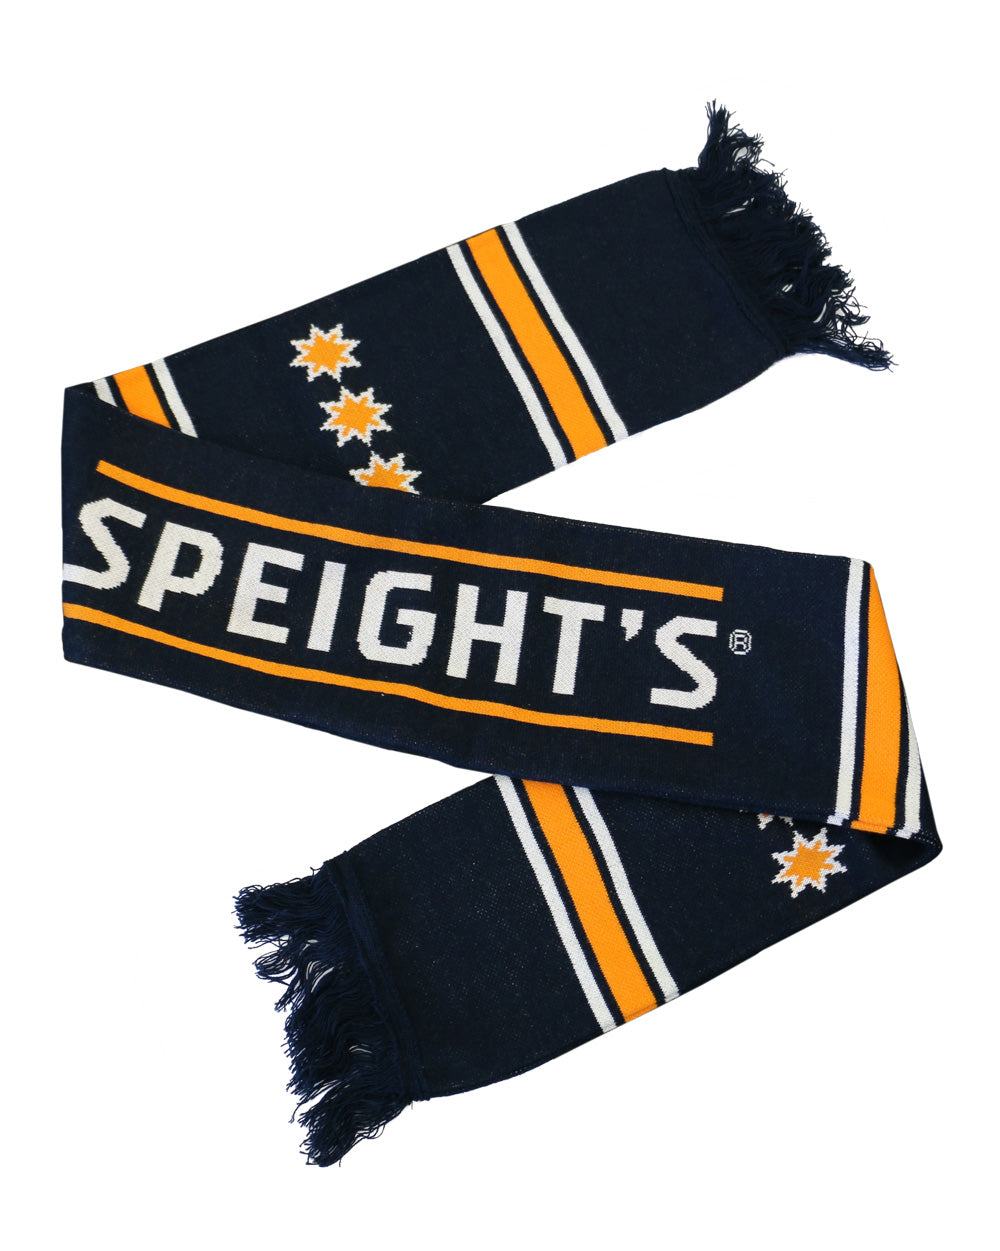 Speight's Scarf -  Beer Gear Apparel & Merchandise - Speights - Lion Red - VB - Tokyo Dy merch